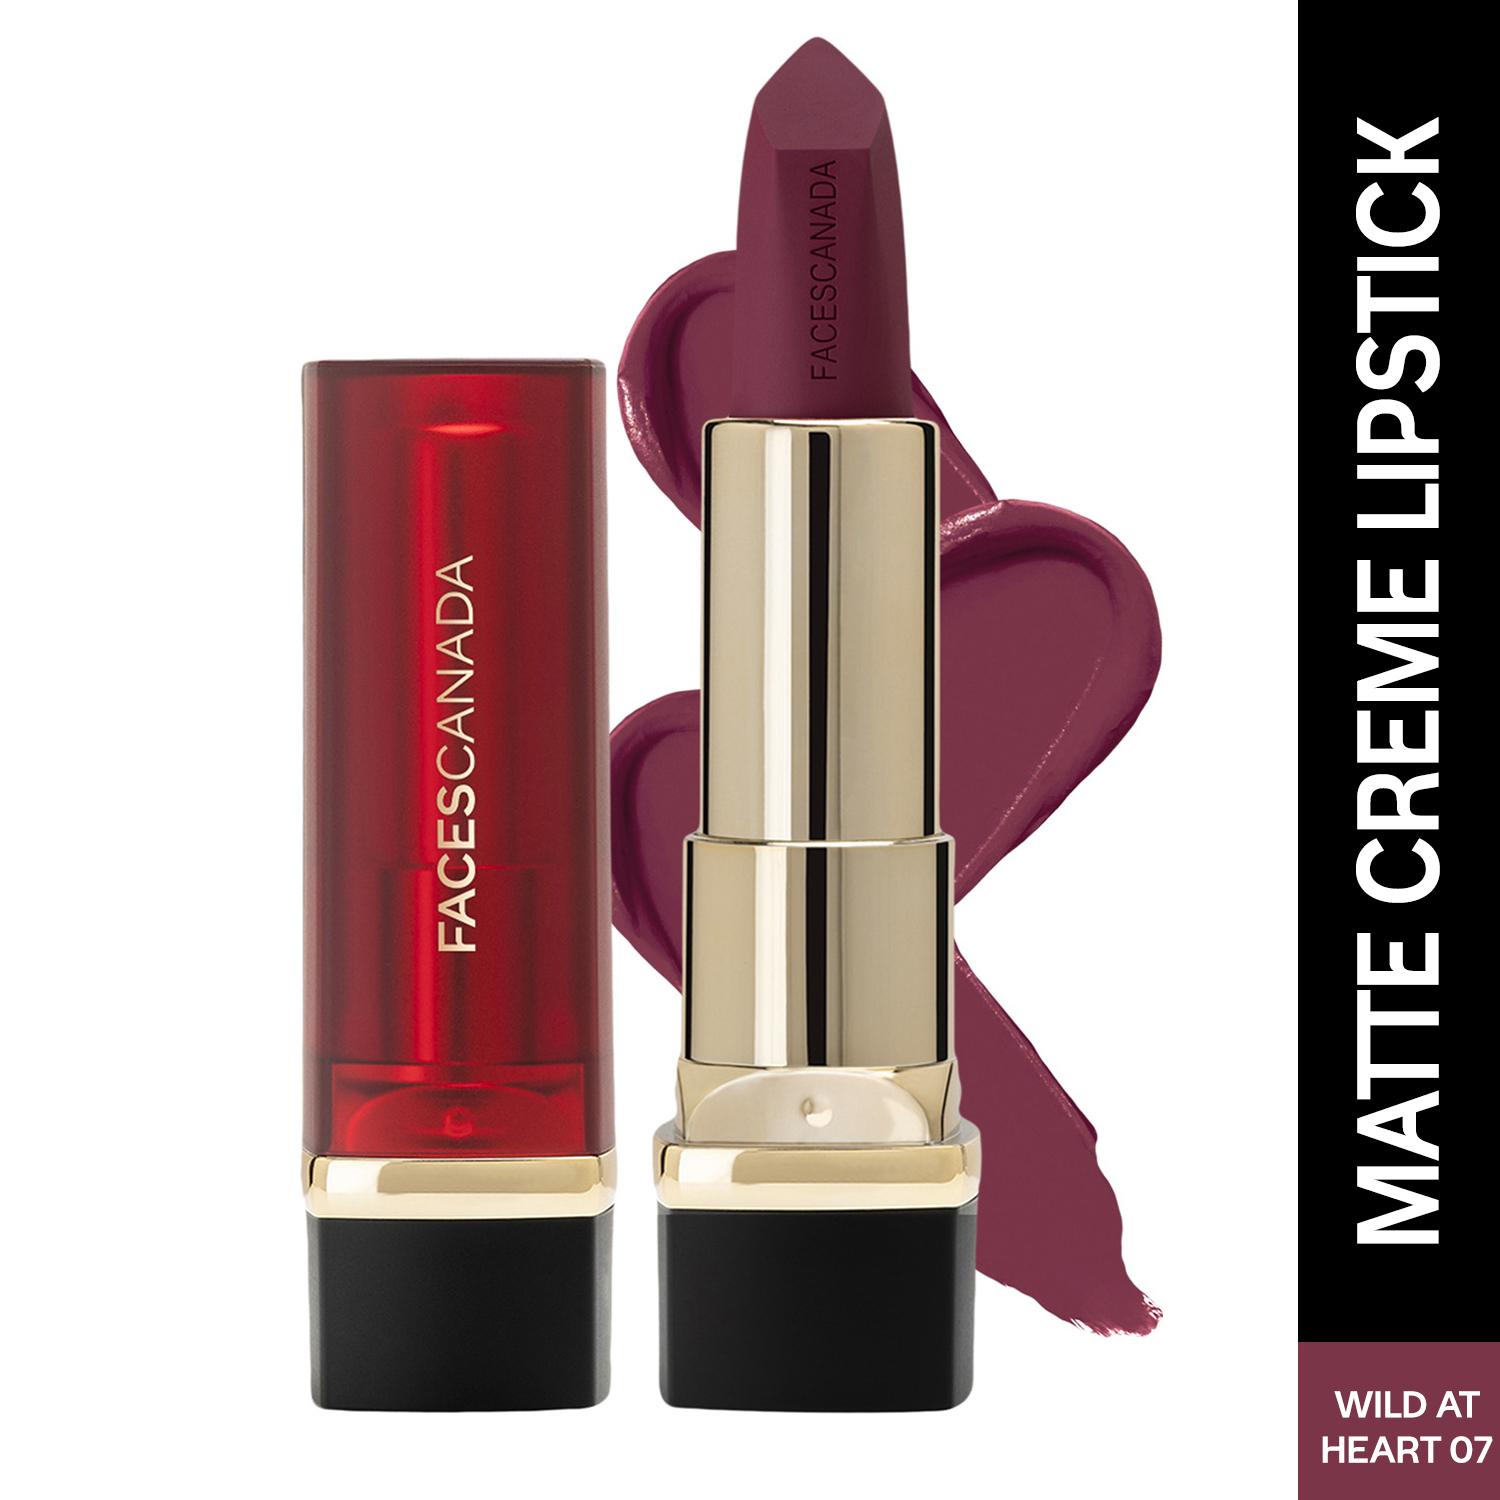 Faces Canada | Faces Canada Comfy Matte Crème Lipstick, 8HR Long Stay, Intense Color - Wild At Heart 07 (4.2 g)